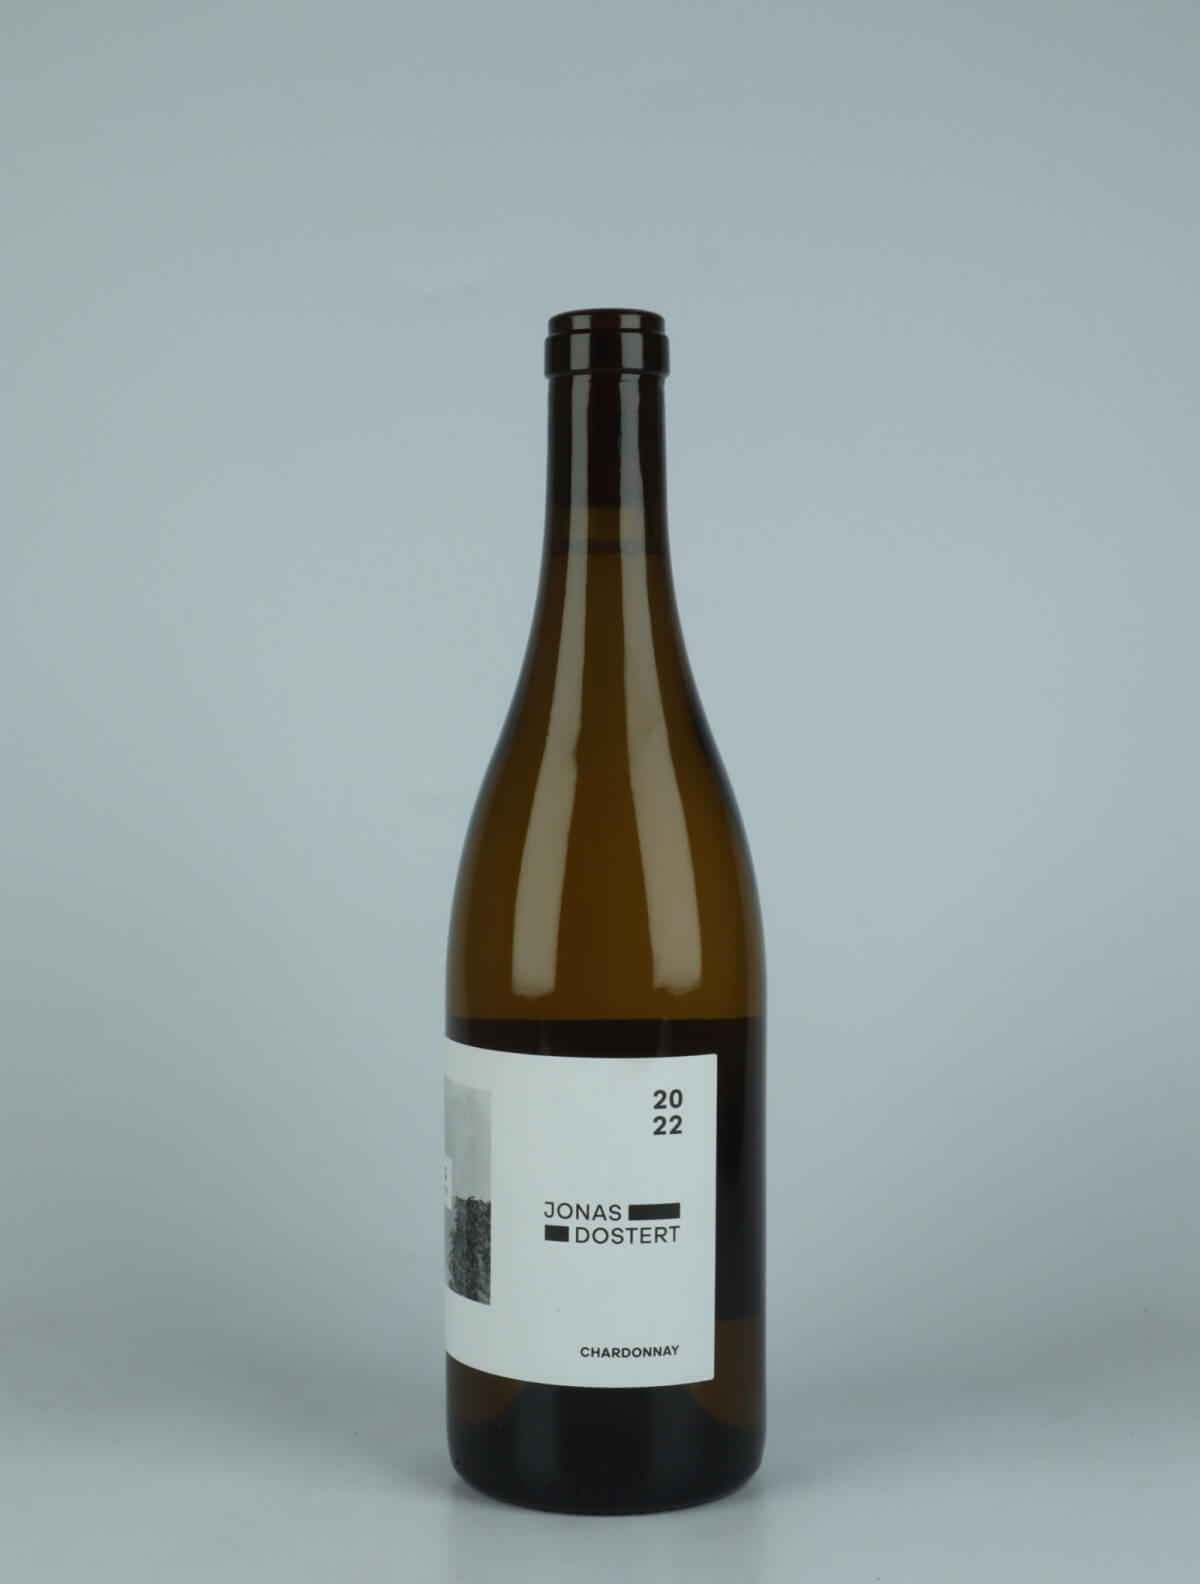 A bottle 2022 Chardonnay White wine from Jonas Dostert, Mosel in Germany